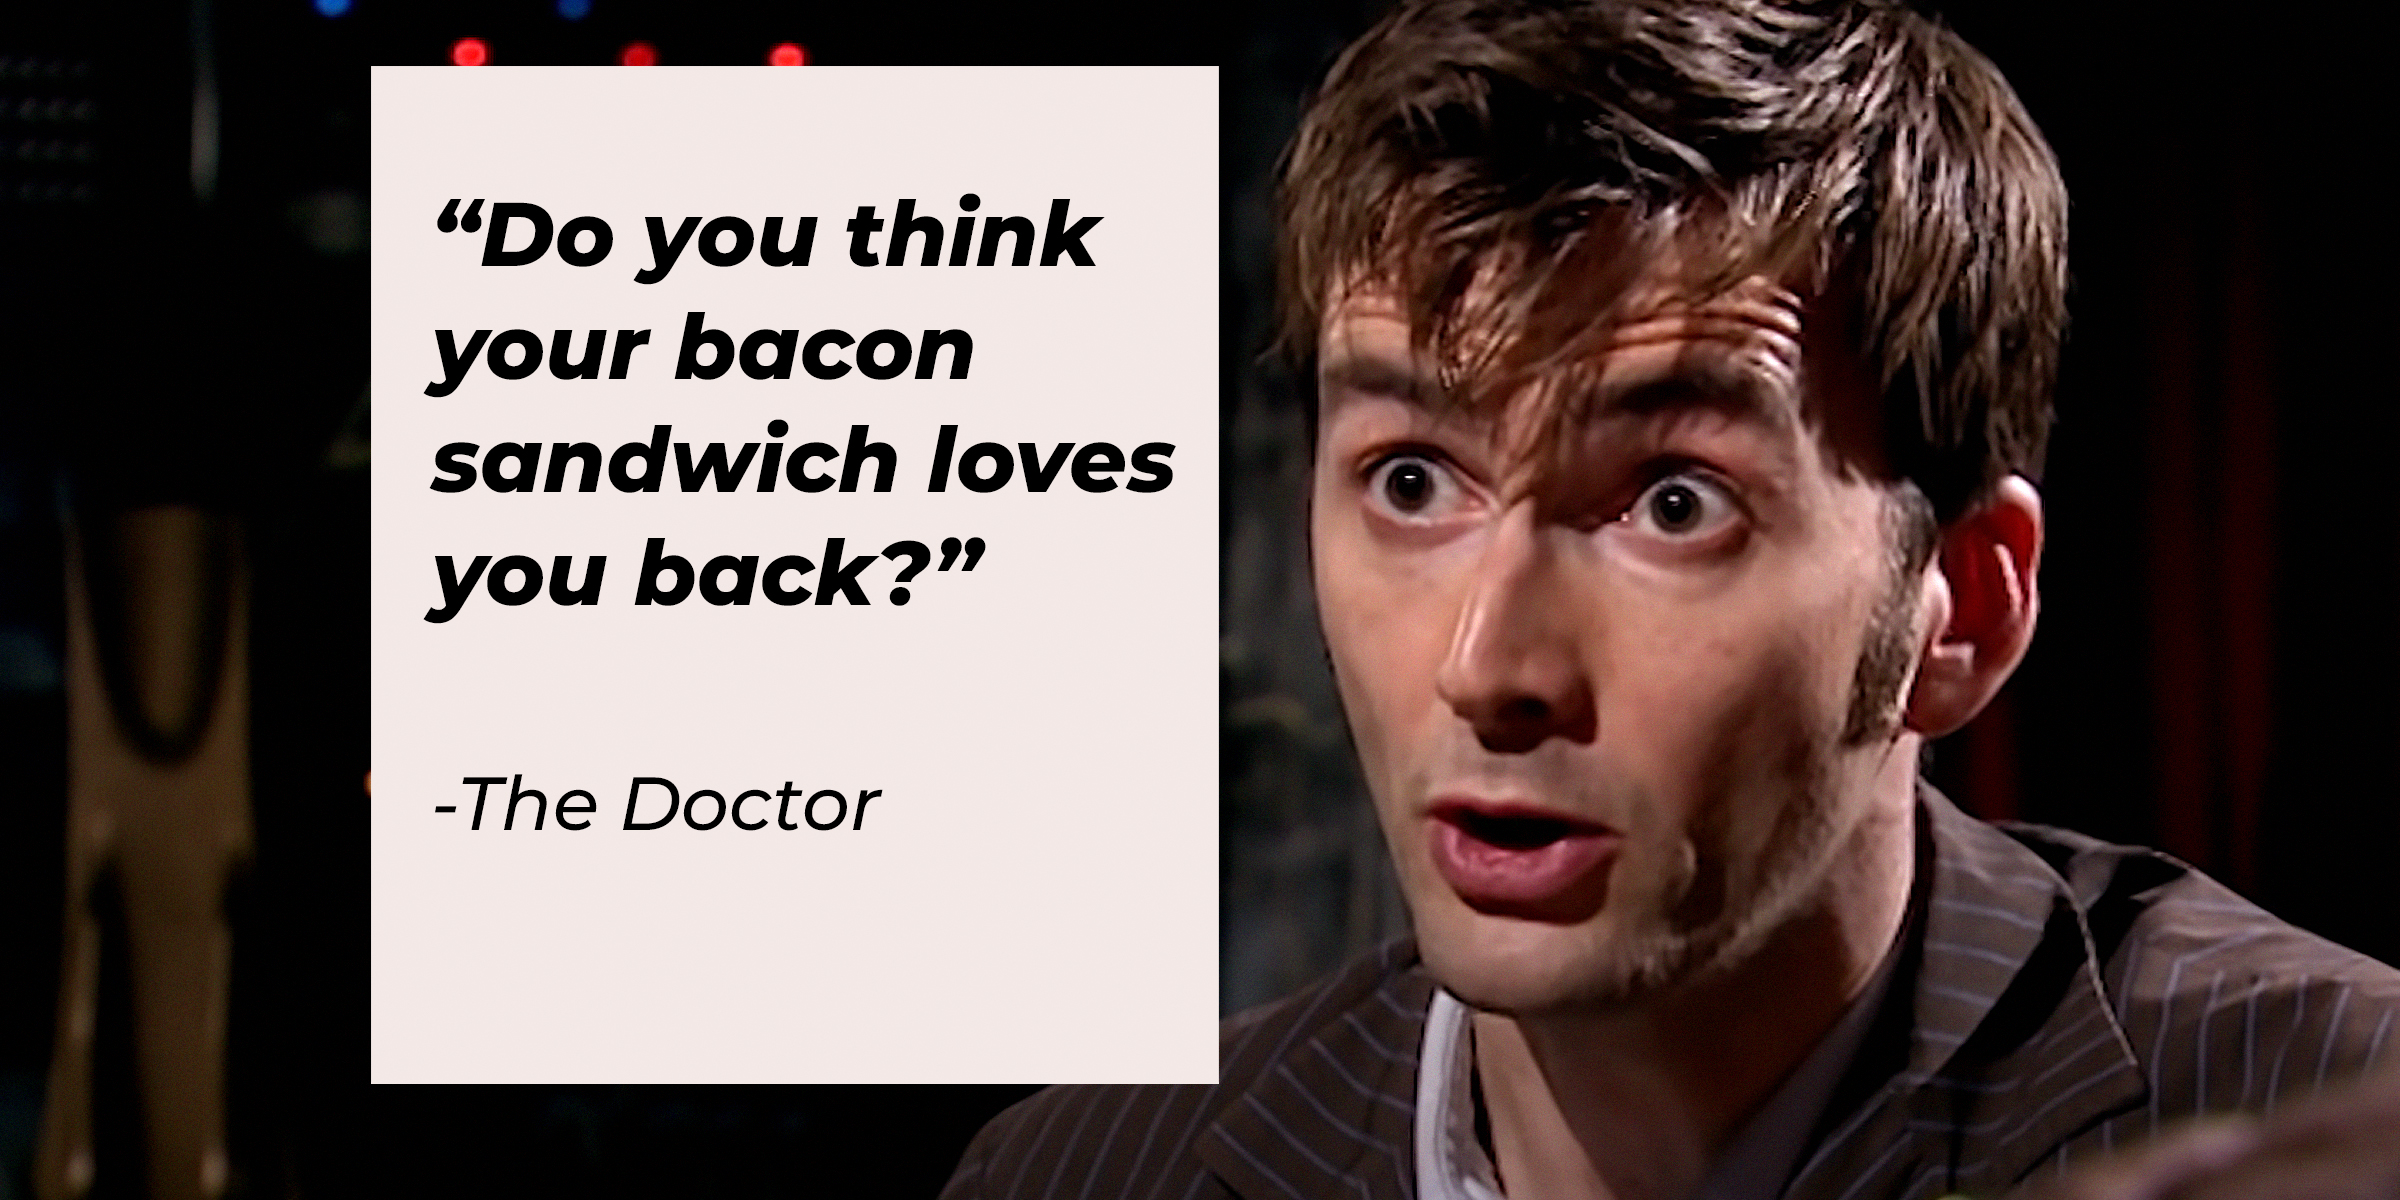 The Doctor with his quote: "Do you think your bacon sandwich loves you back?" | Source: youtube.com/DoctorWho